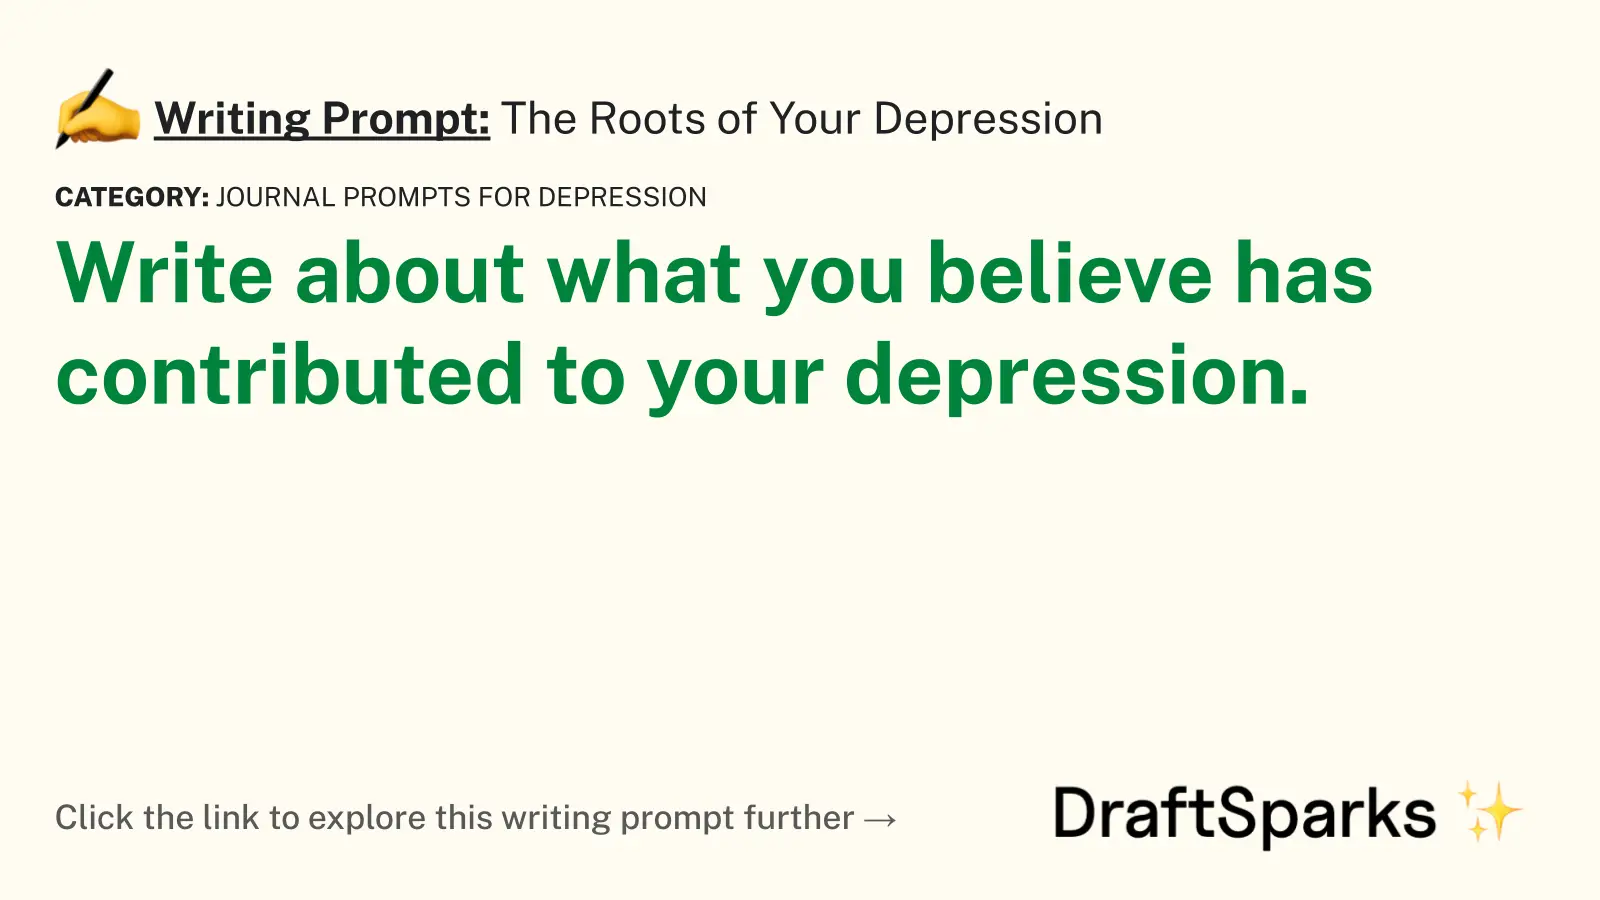 The Roots of Your Depression